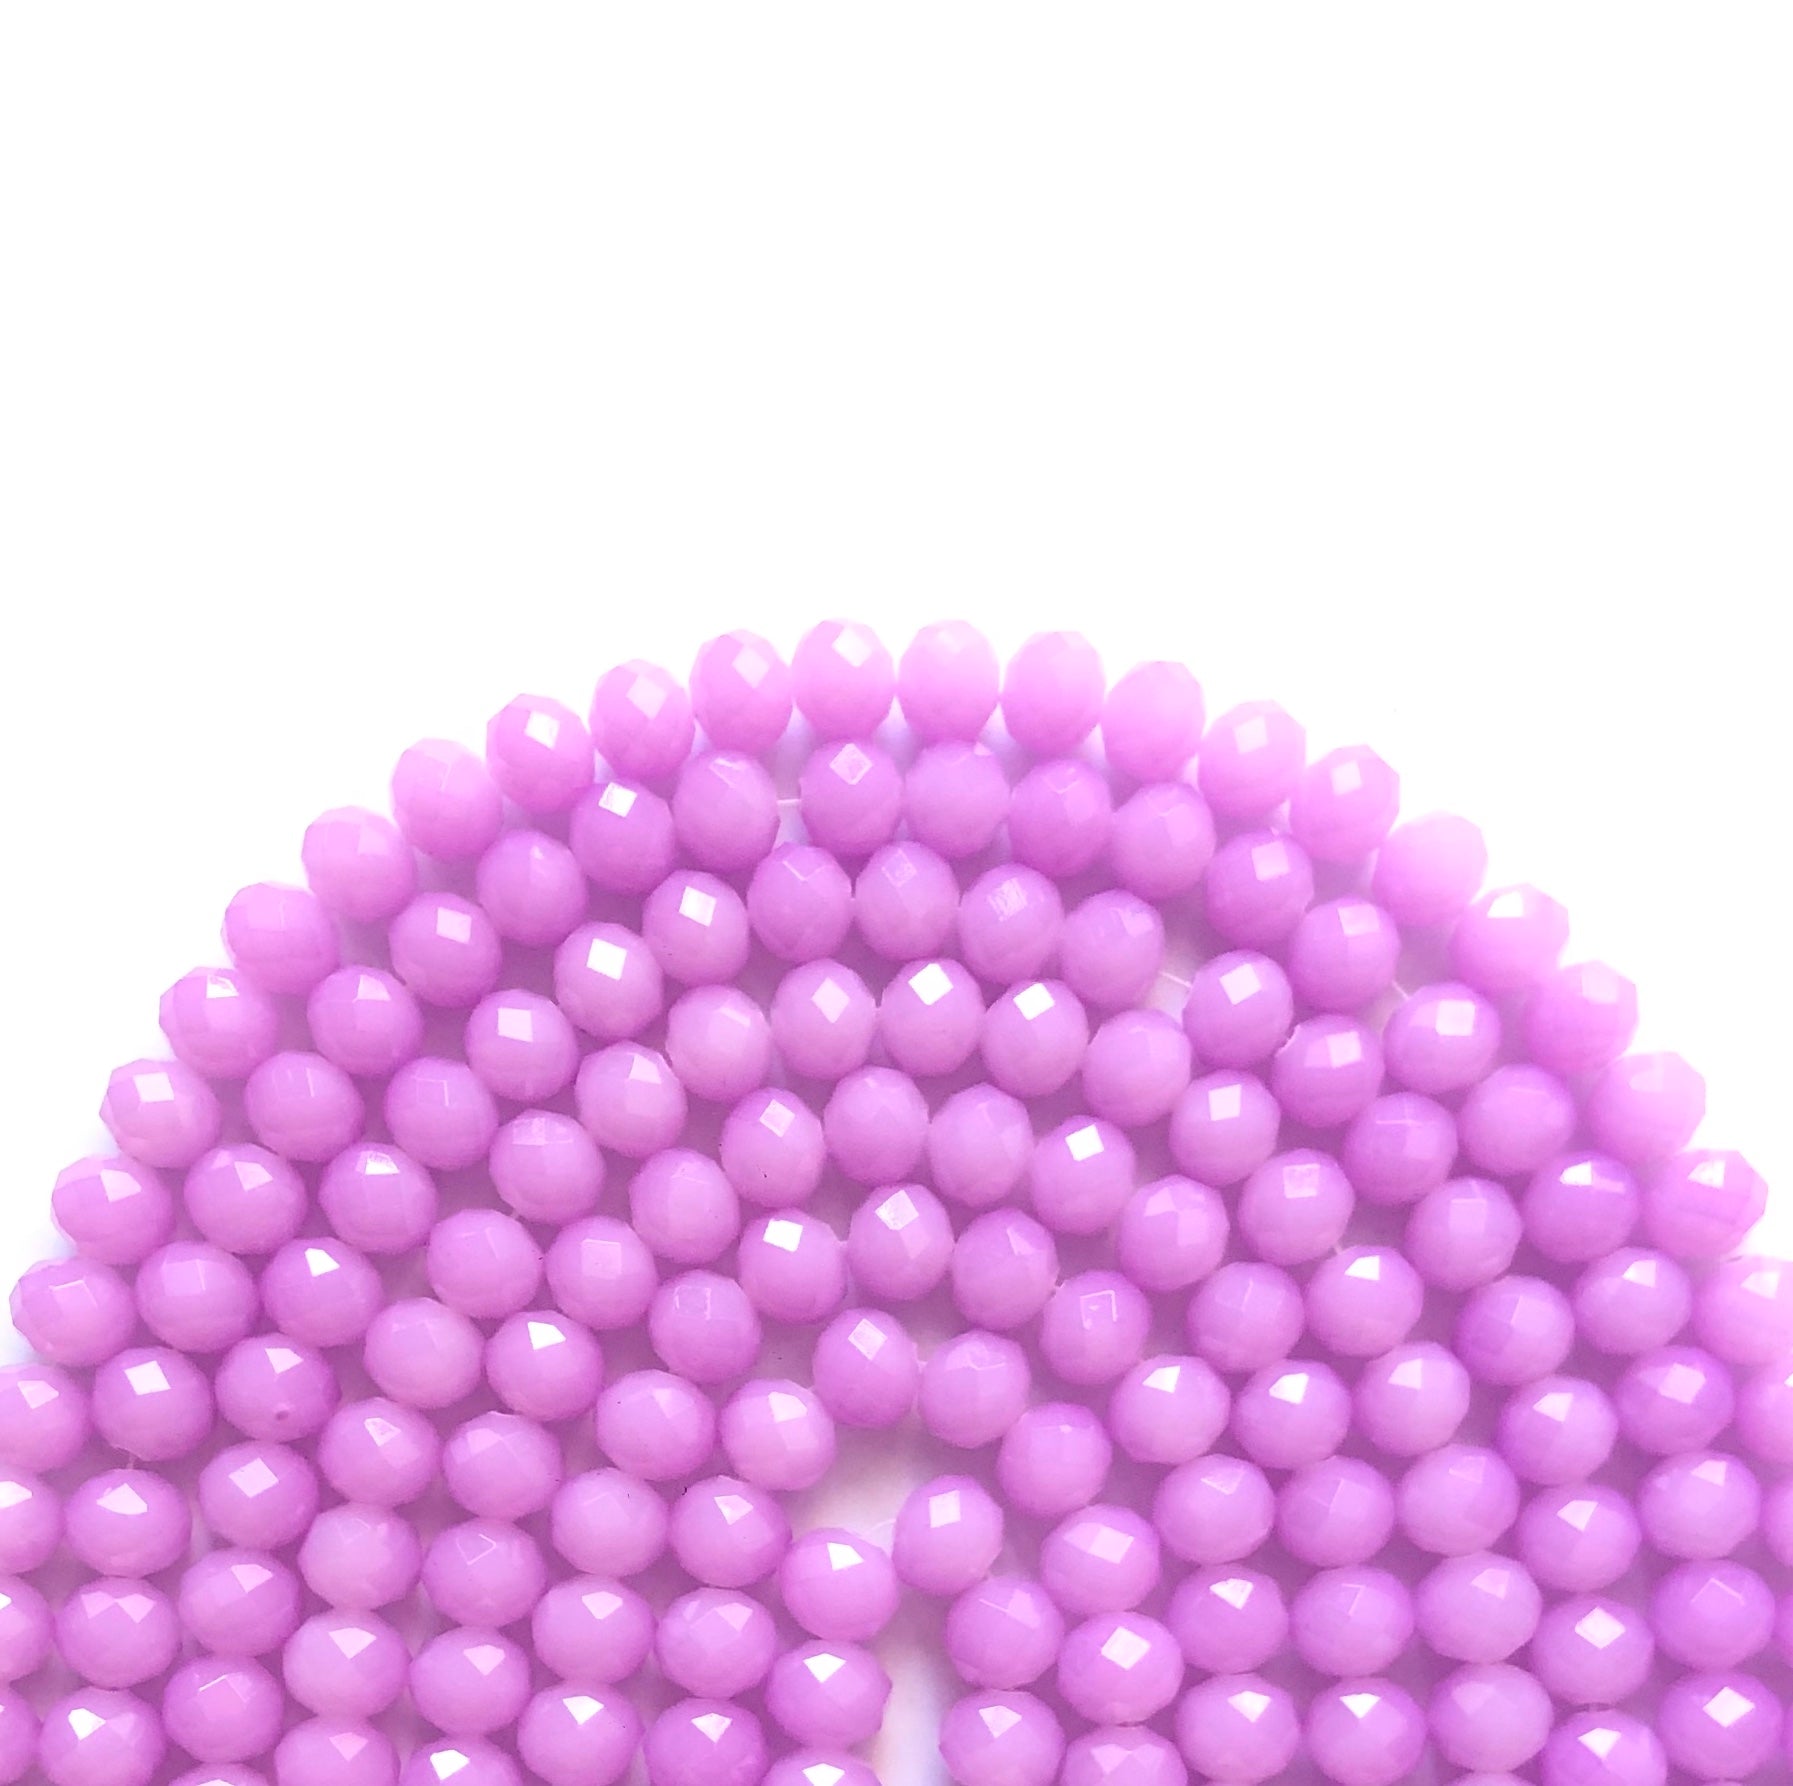 2 Strands/lot 10mm Light Purple Faceted Glass Beads Light Purple Glass Beads Faceted Glass Beads Charms Beads Beyond